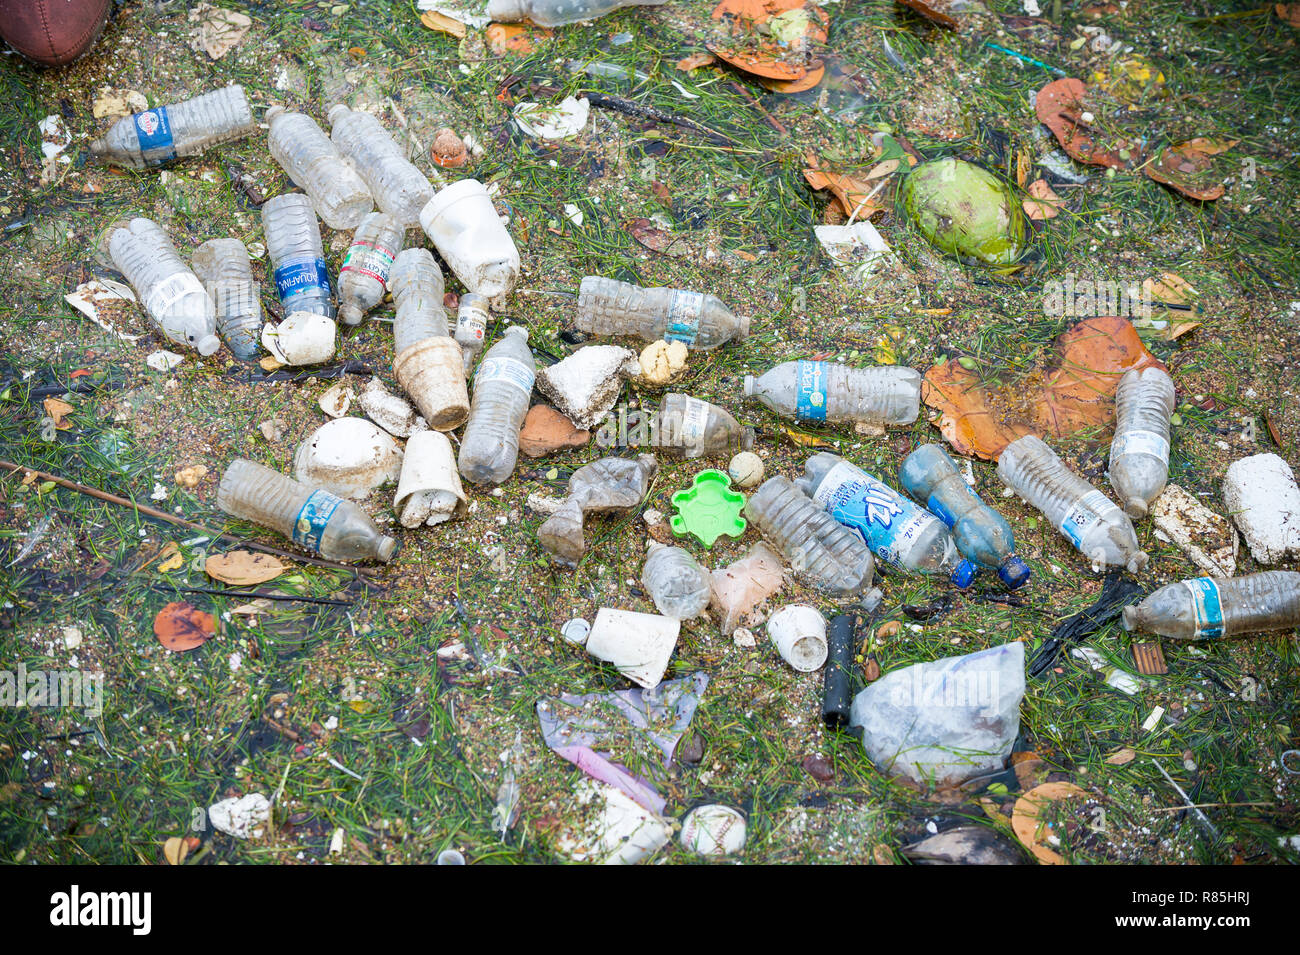 MIAMI - SEPTEMBER, 2018: Plastic water bottles, cups, and bits of Styrofoam float in Biscayne Bay, where ocean pollution is a chronic problem. Stock Photo